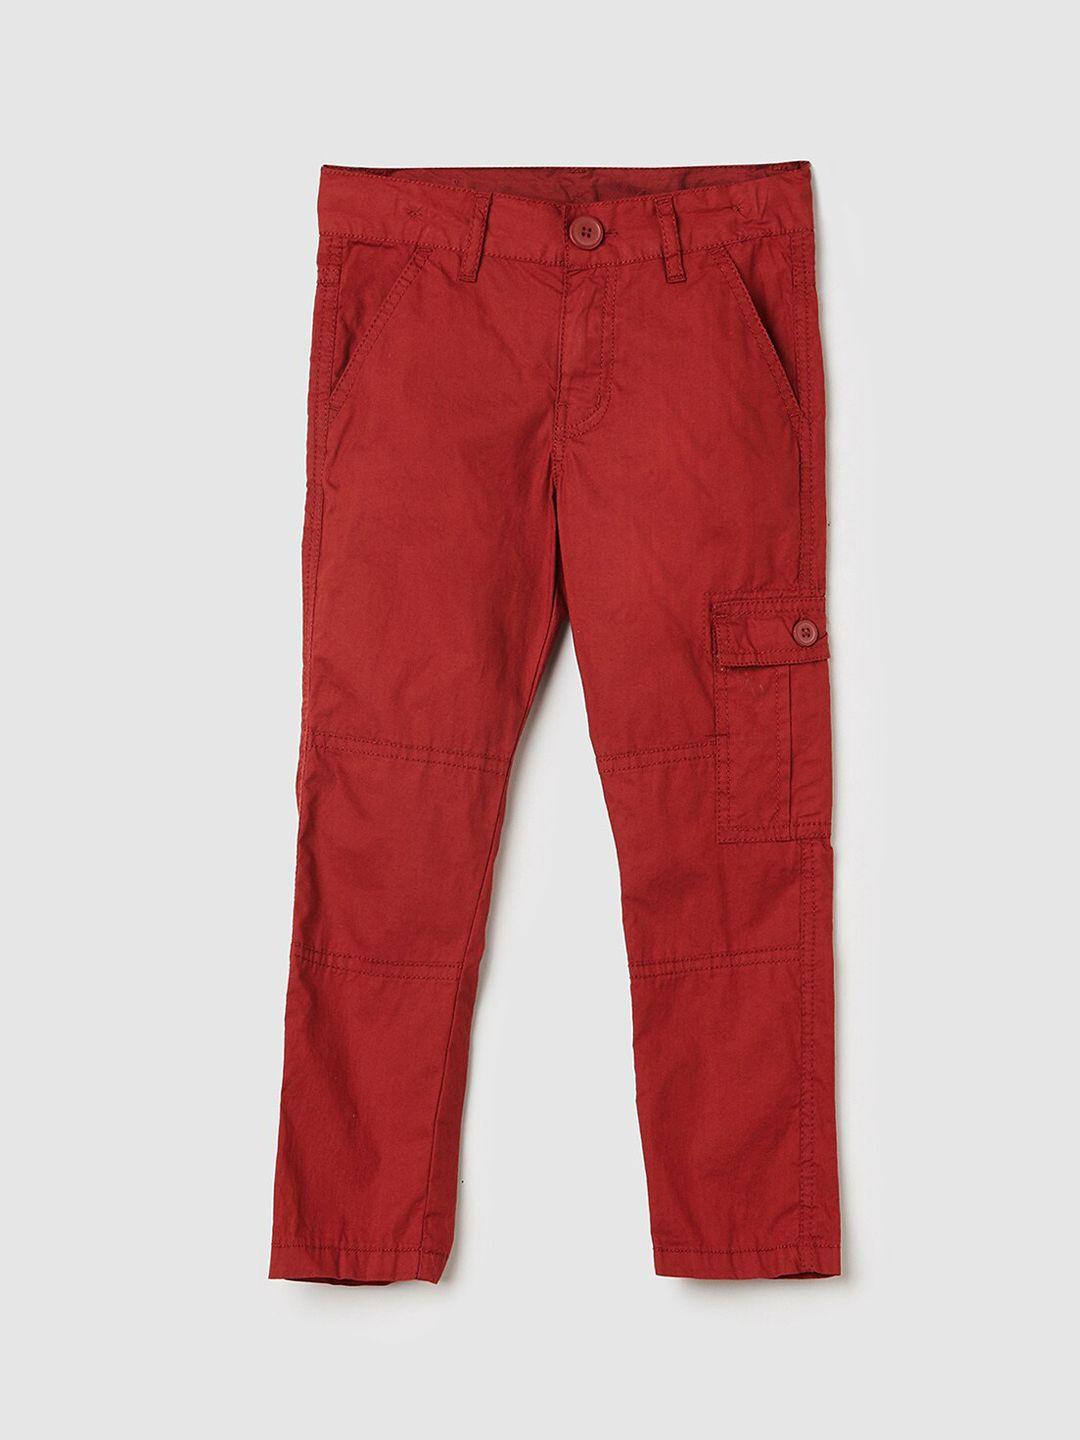 max boys coral cargos trousers